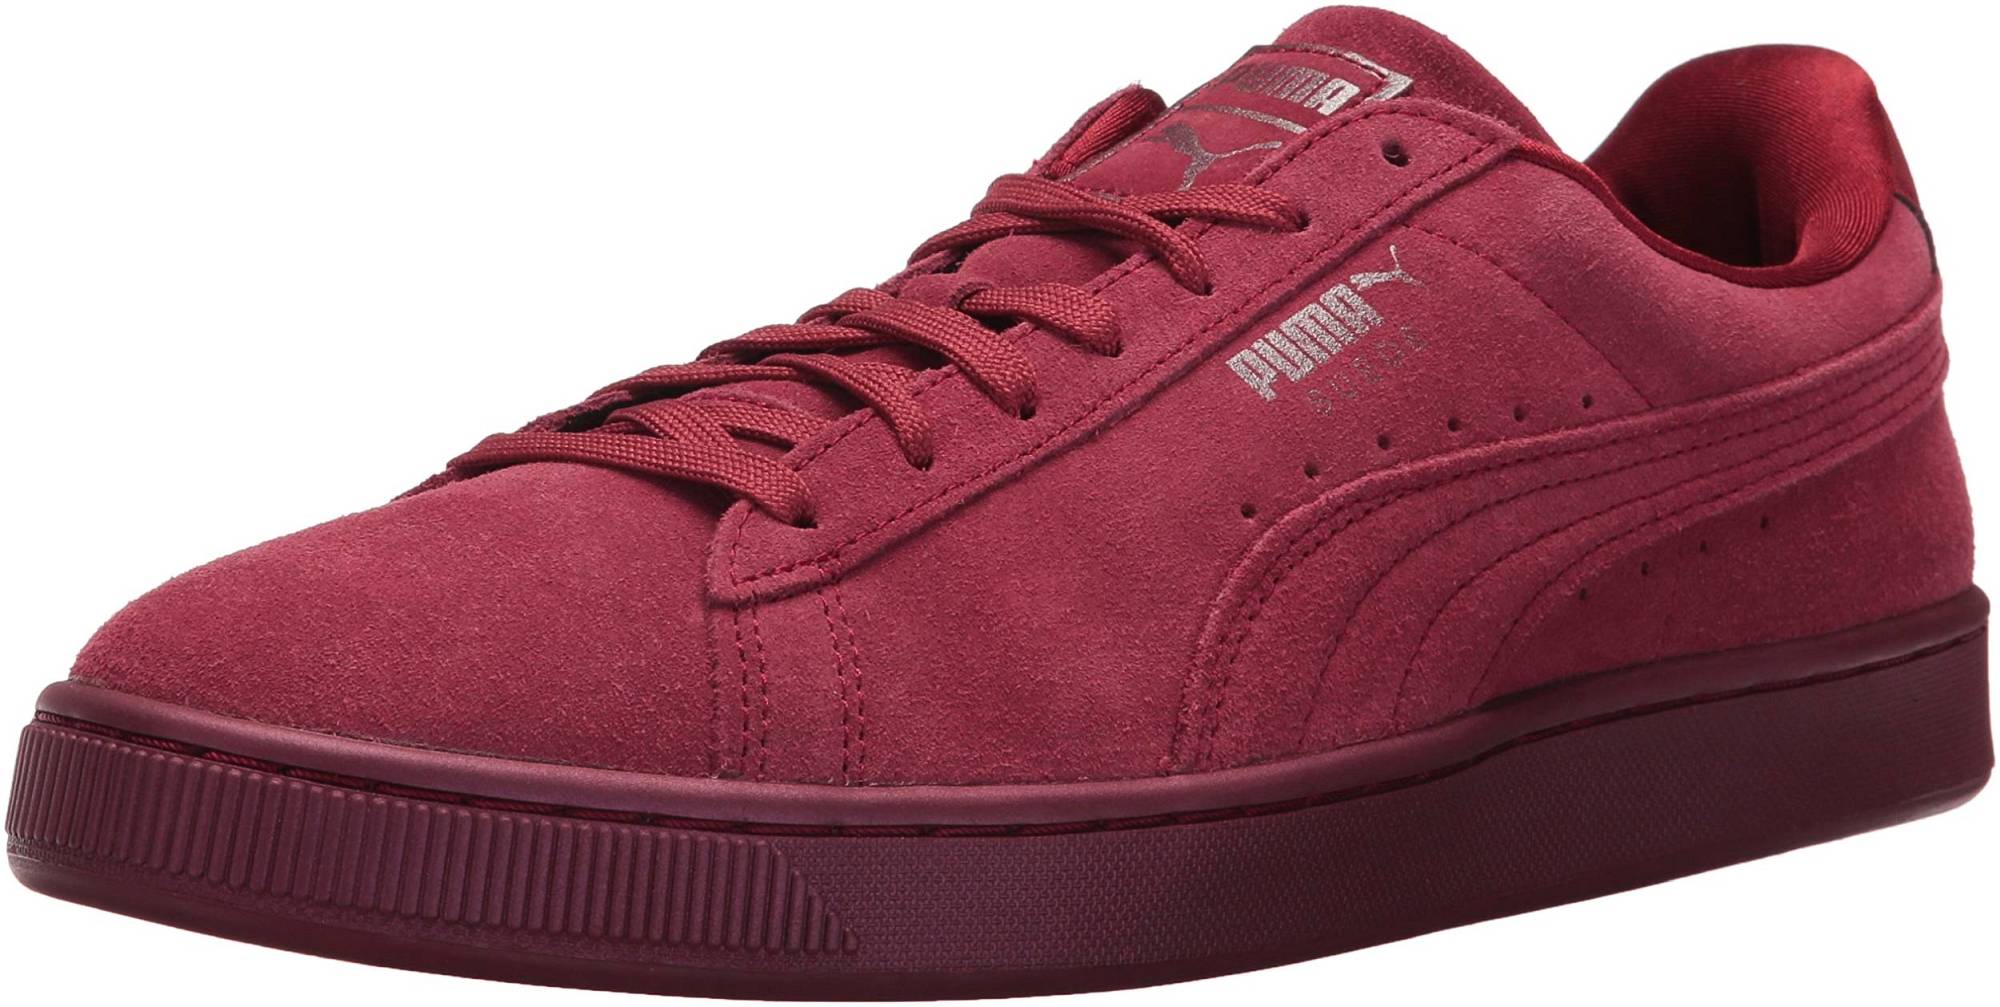 Puma Suede Classic Anodized – Shoes Reviews & Reasons To Buy